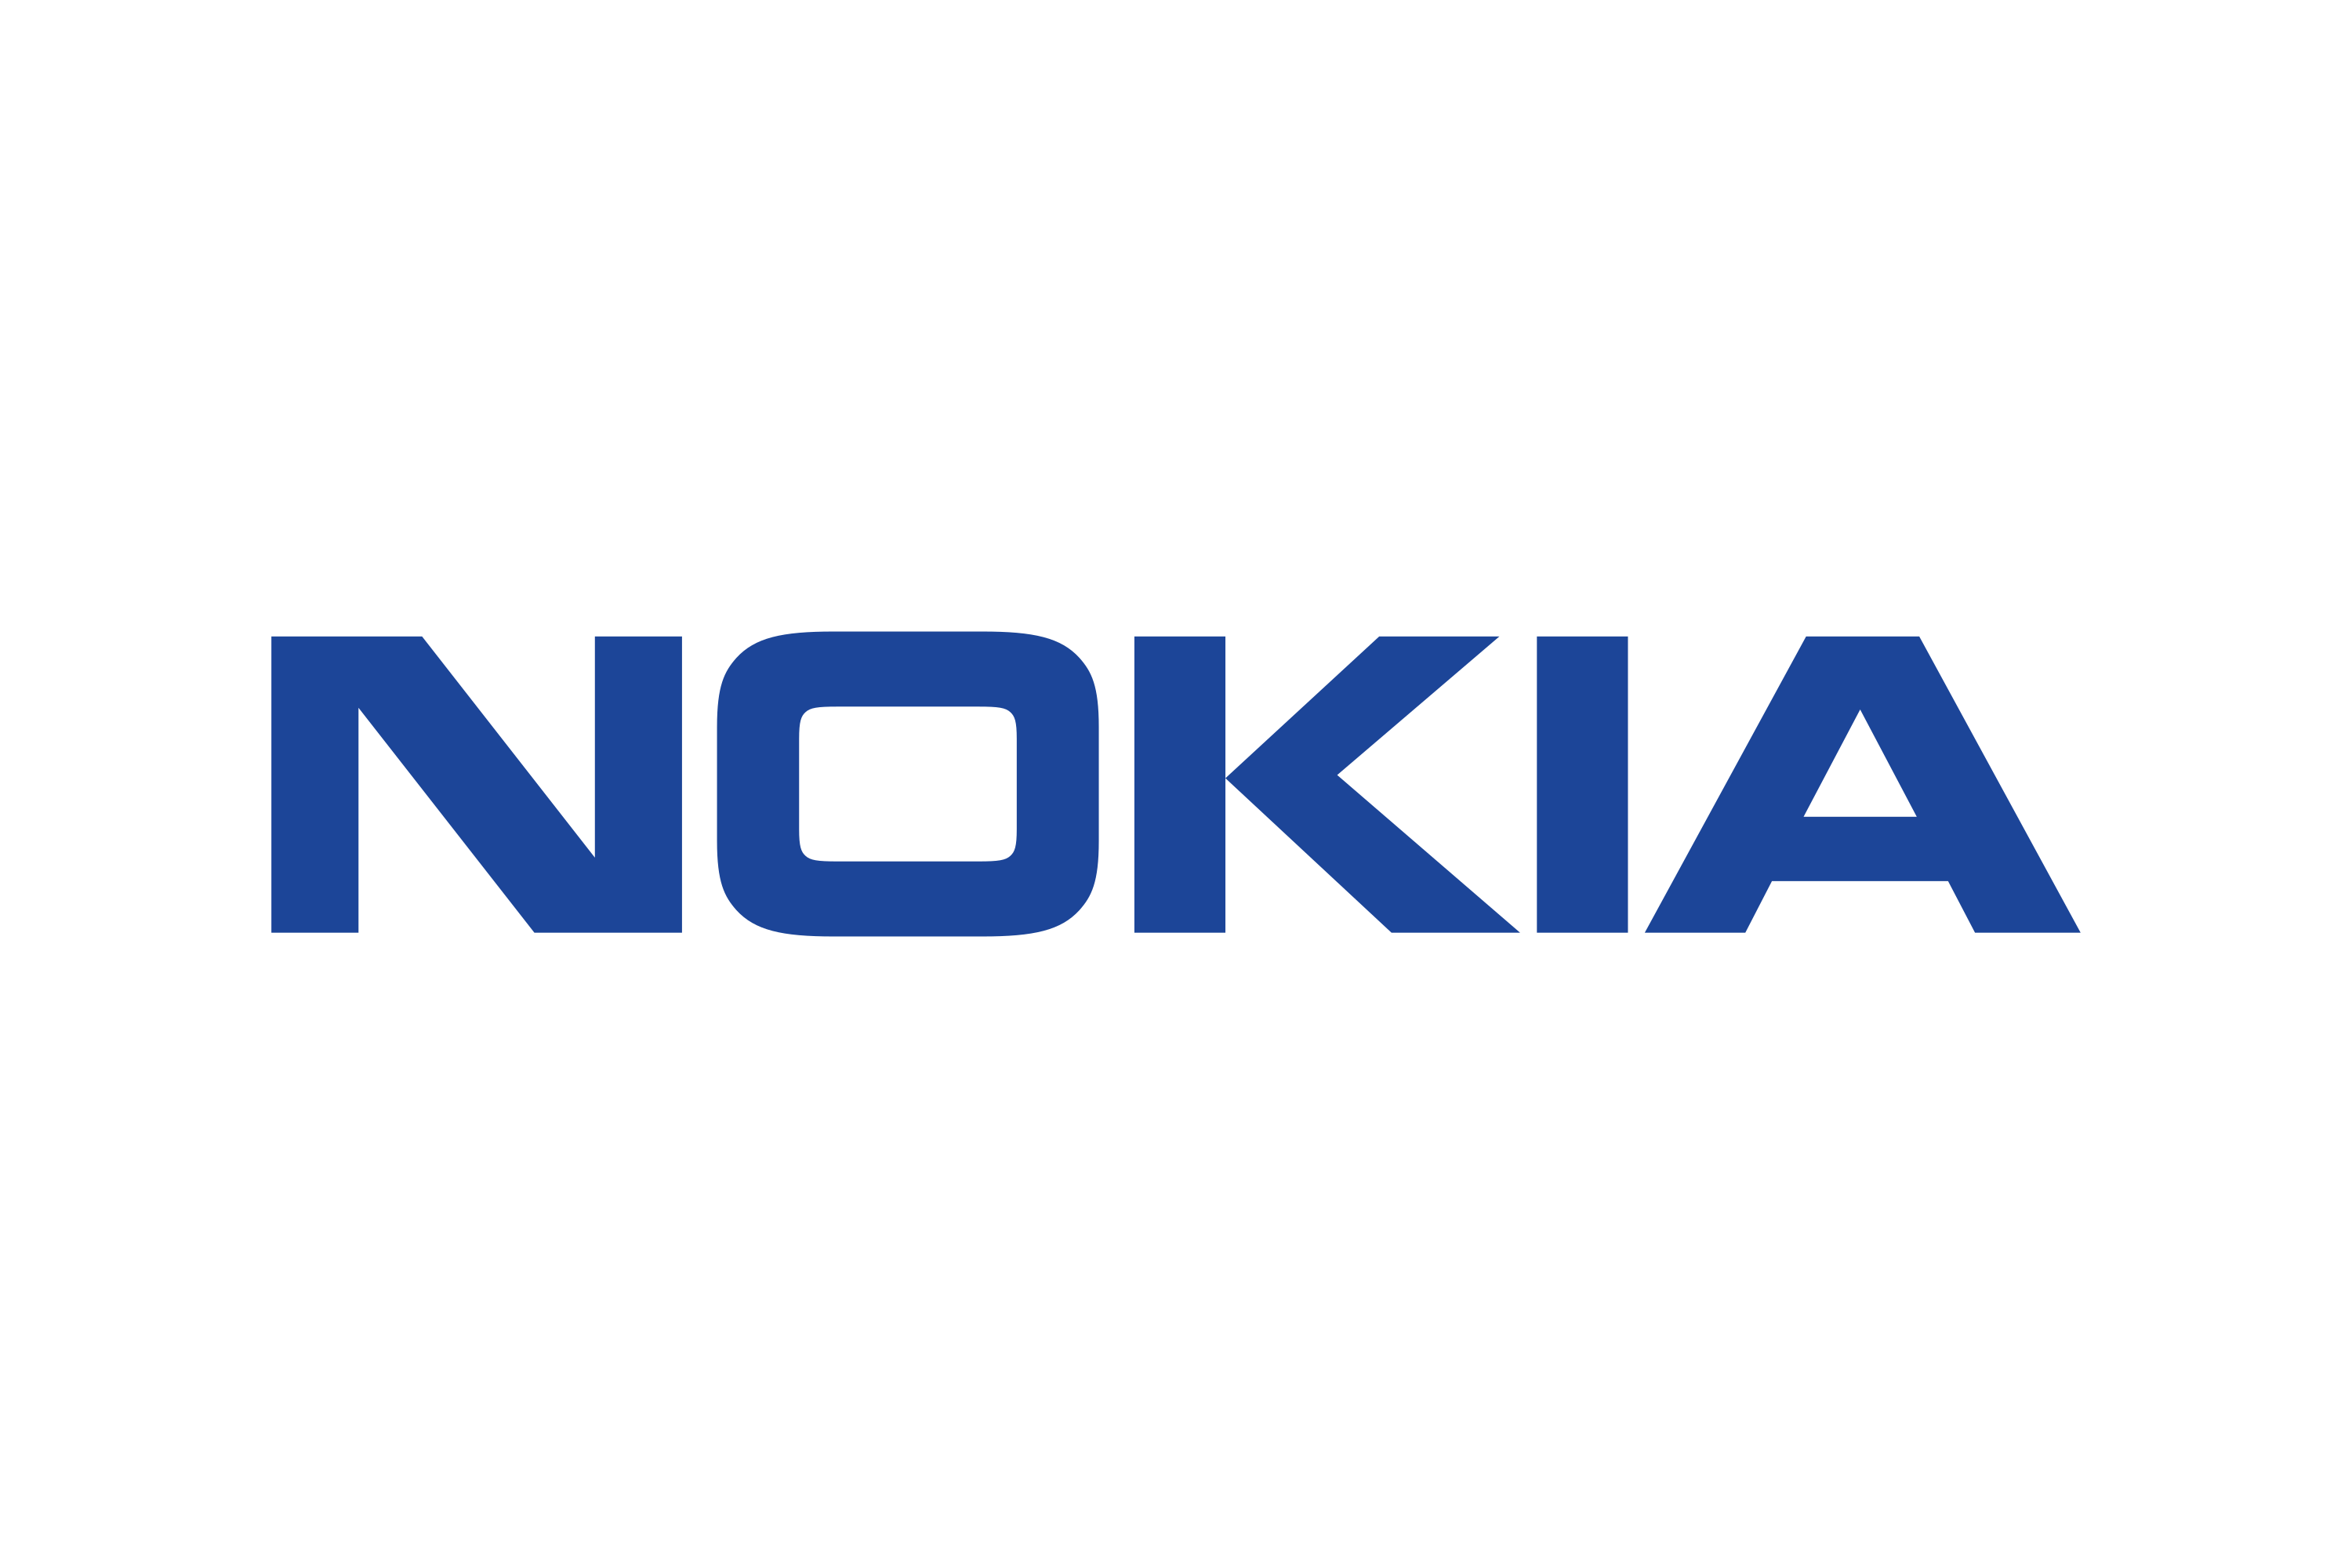 Nokia 8 Sirocco Hard Reset Guide [Wipe All Data]